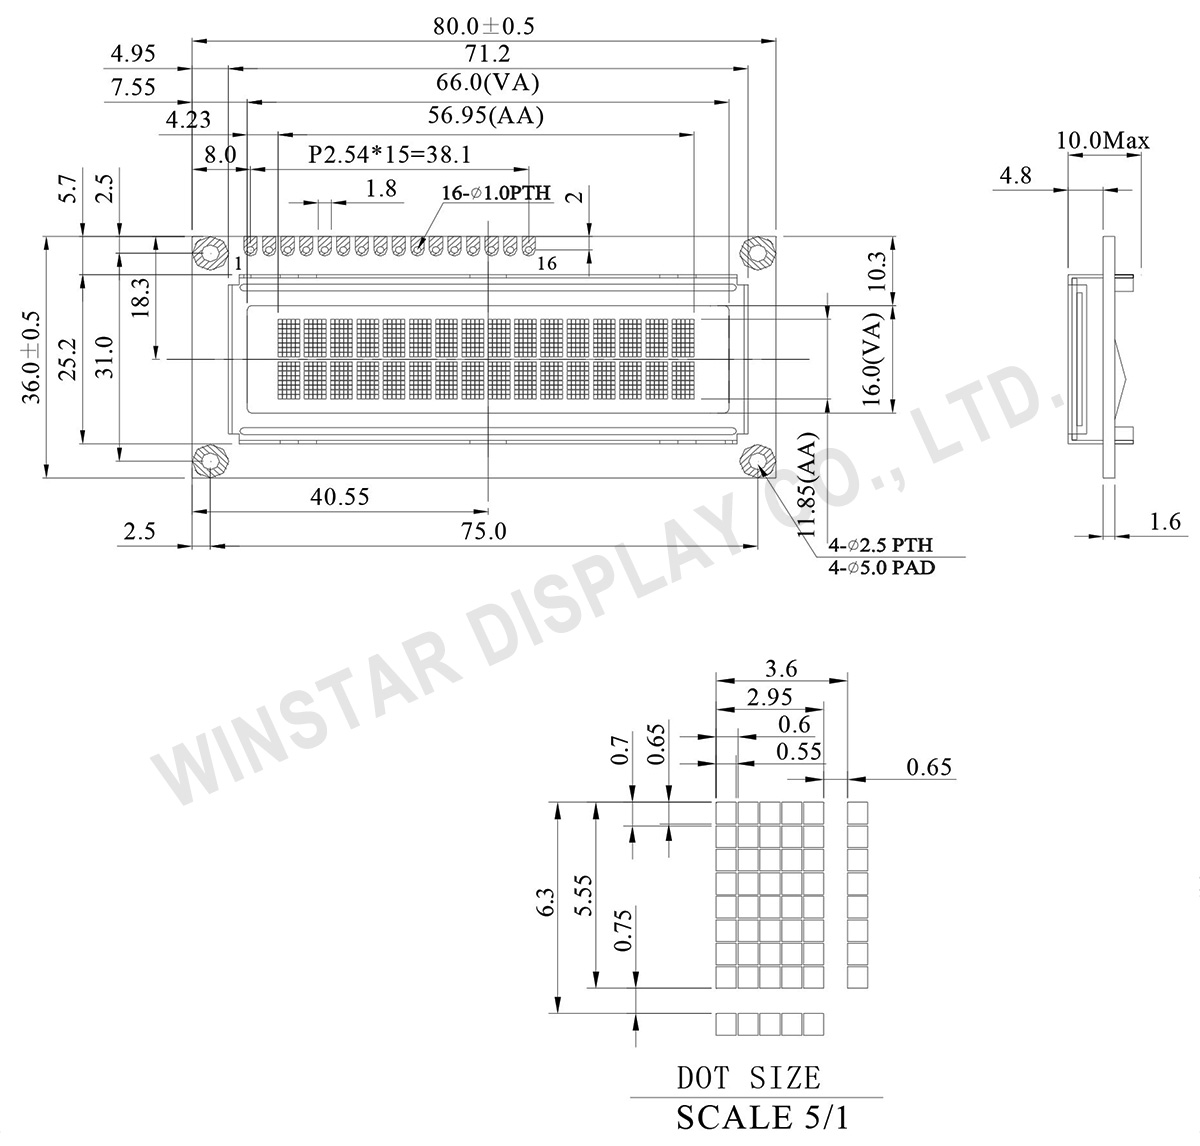 WEH001602A 16x2 OLED Character Display